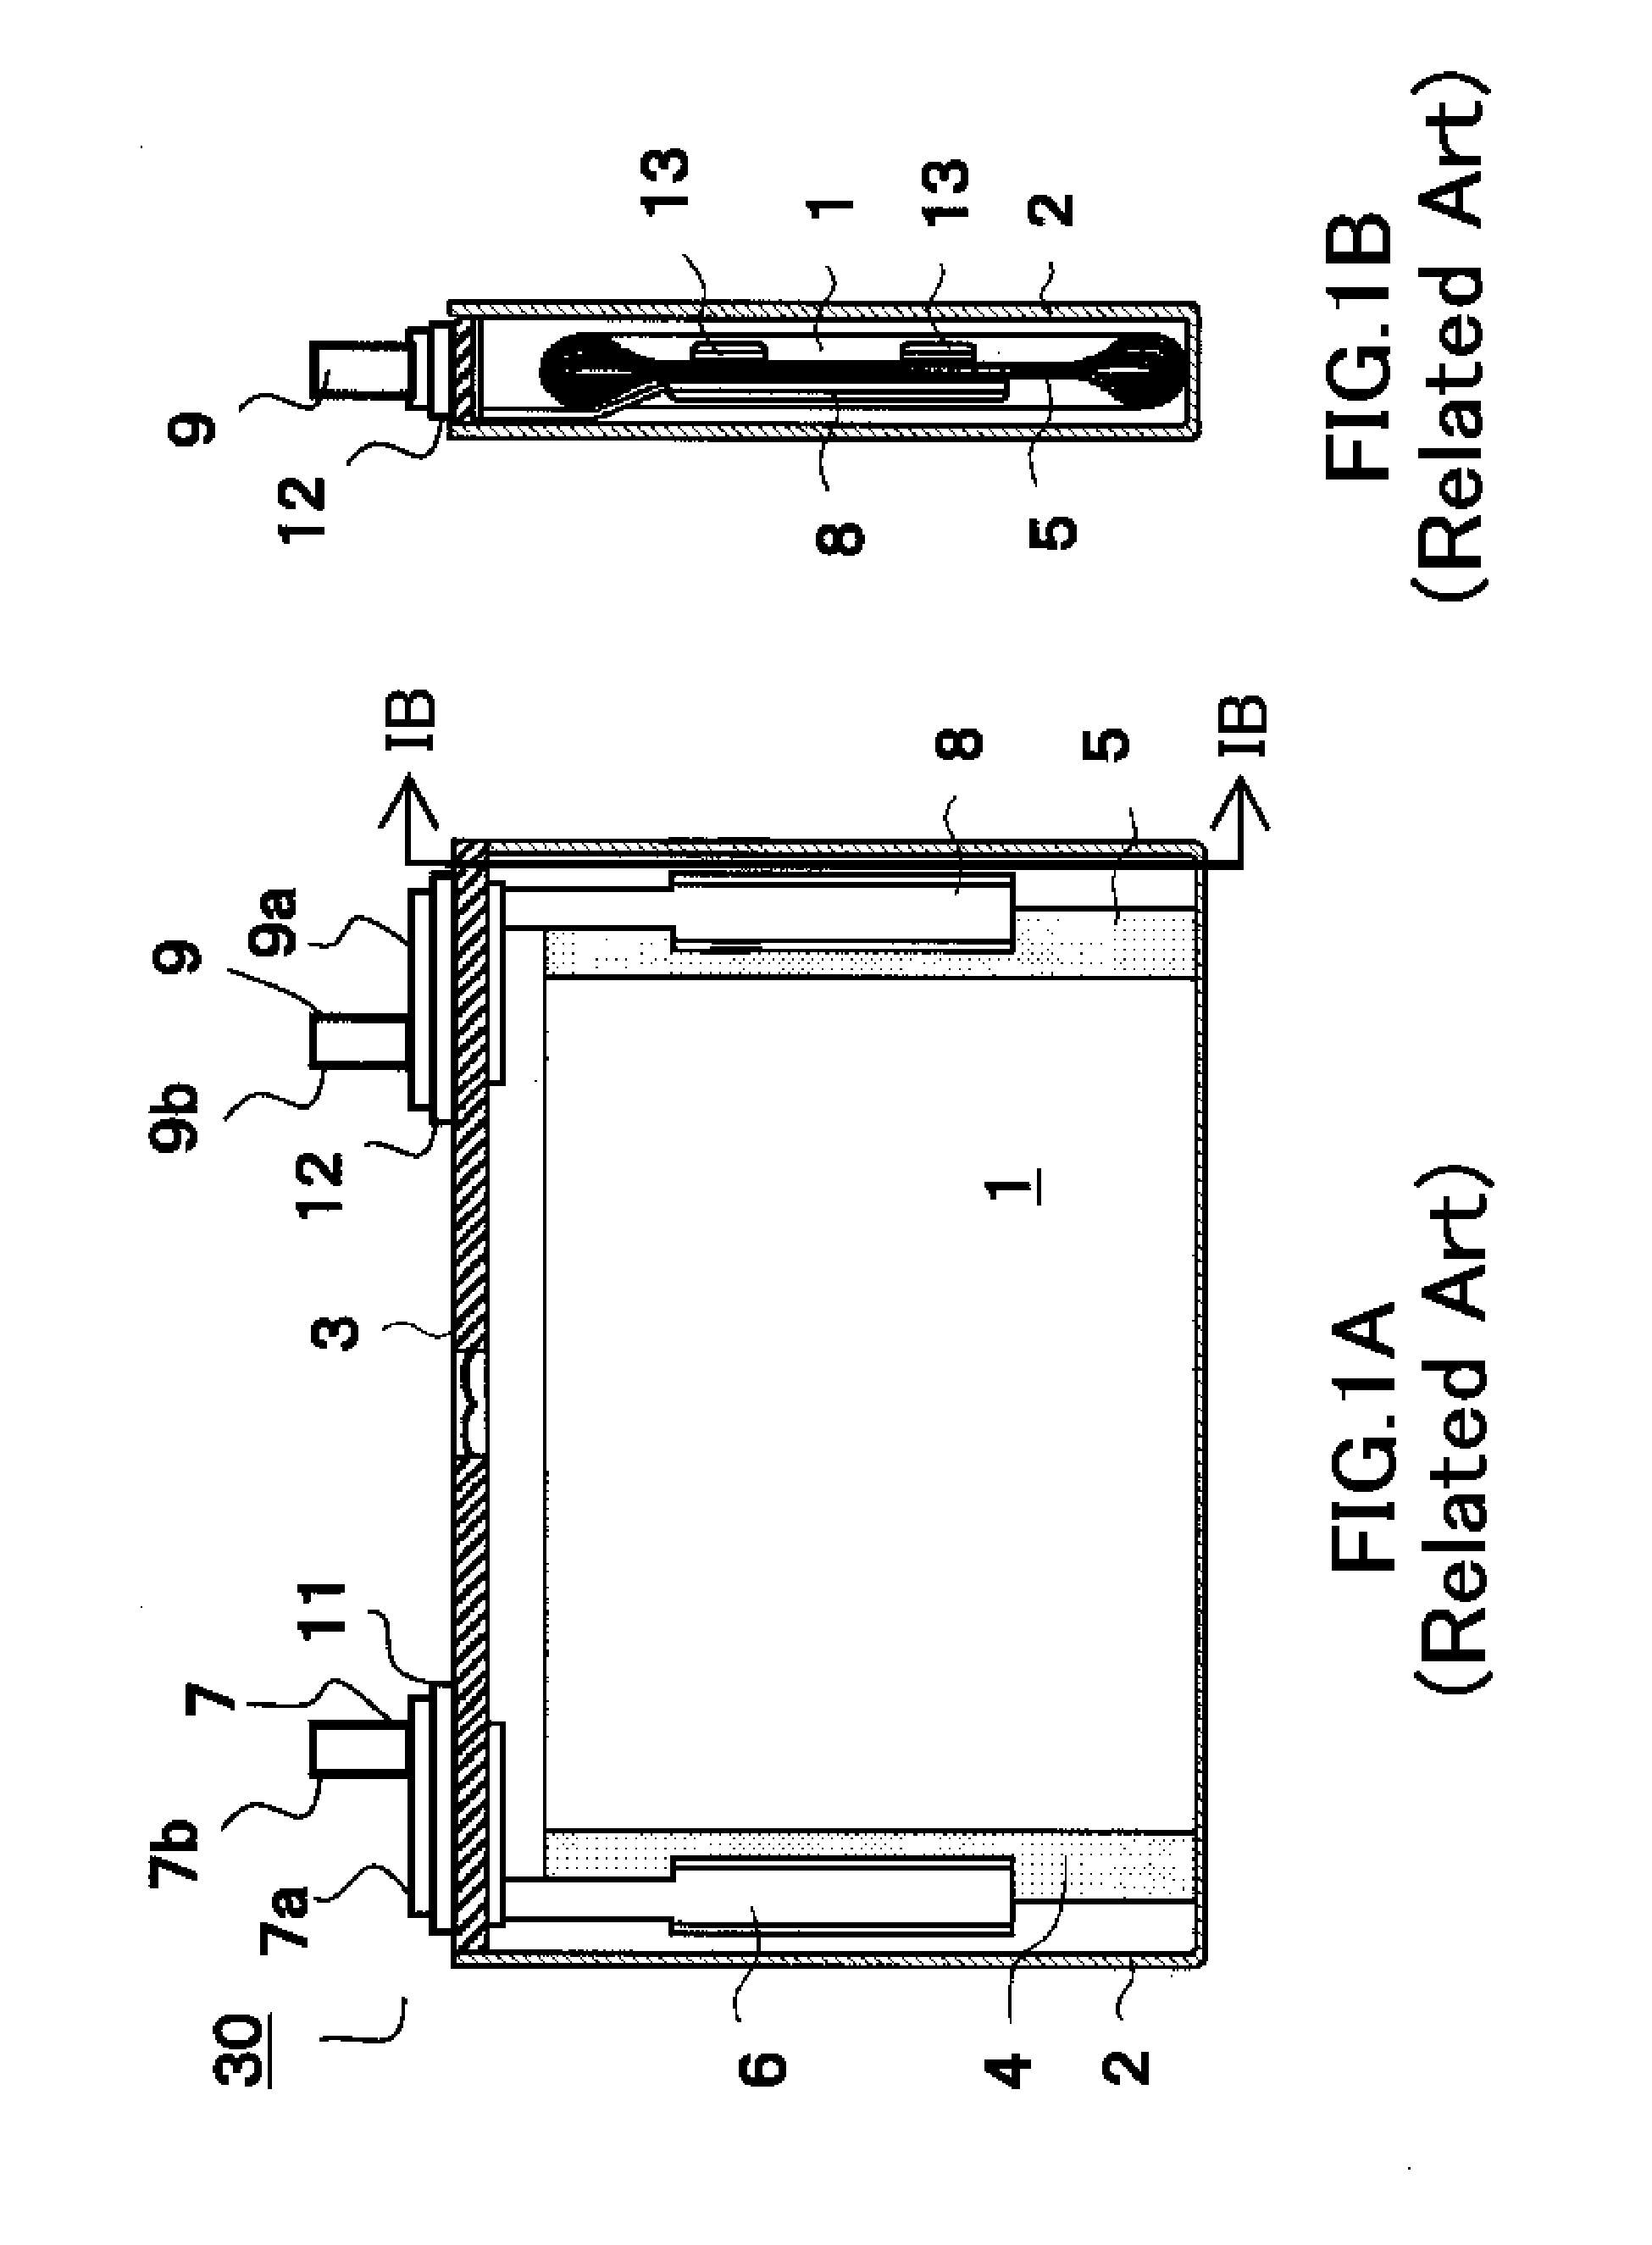 Nonaqueous electrolyte secondary battery and method for manufacturing the same